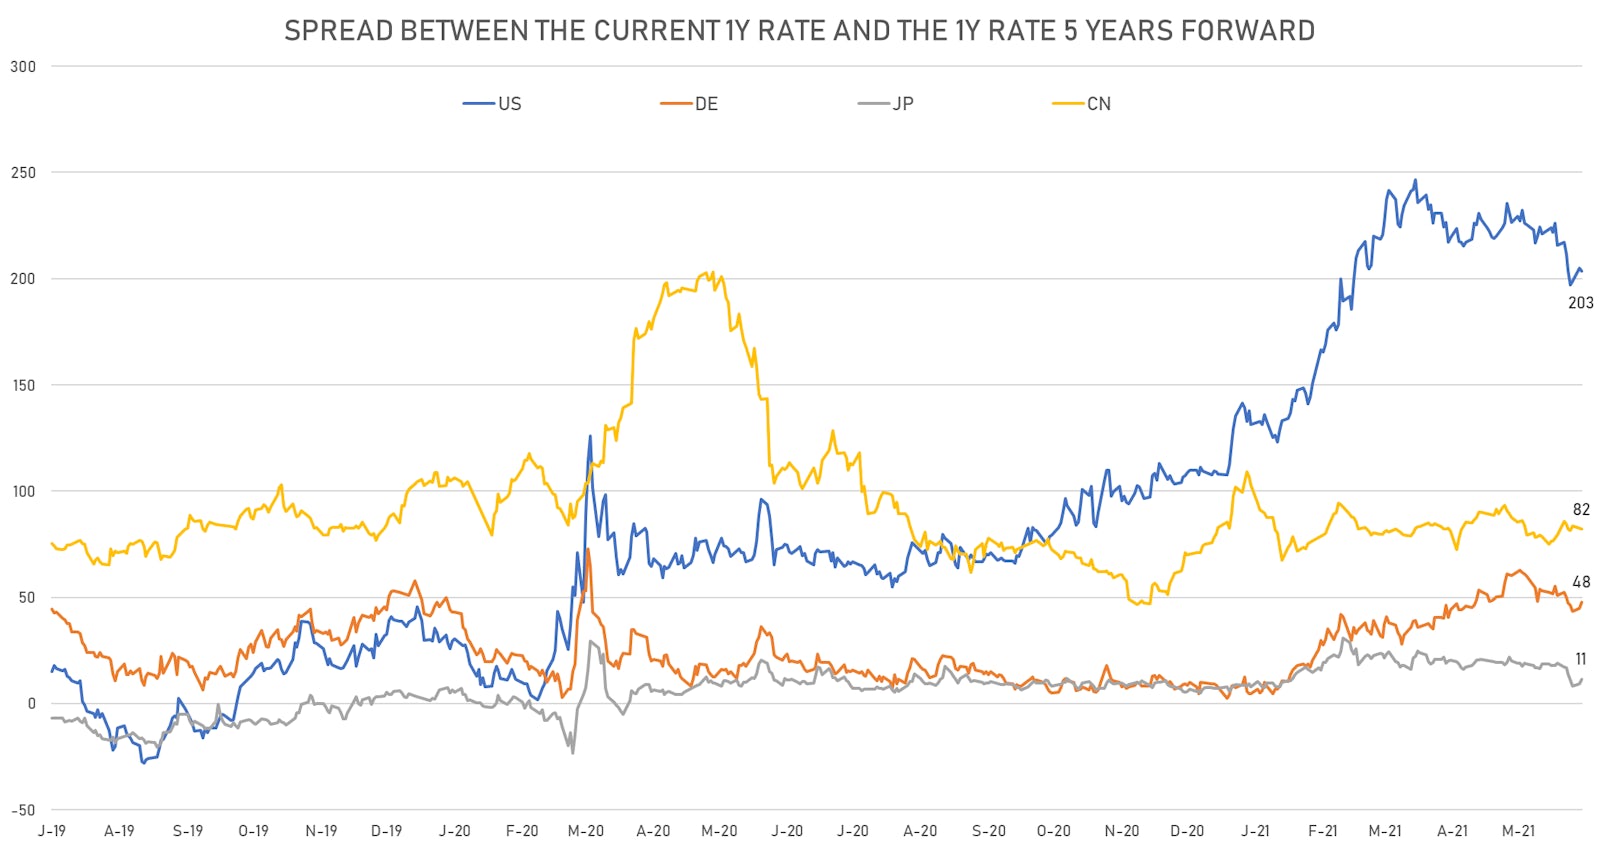 Implied rate hikes over the next 5 years, derived from the spread between the 1-year zero coupon and the 1-year zero coupon 5 years forward | Sources: ϕpost, Refinitiv data 